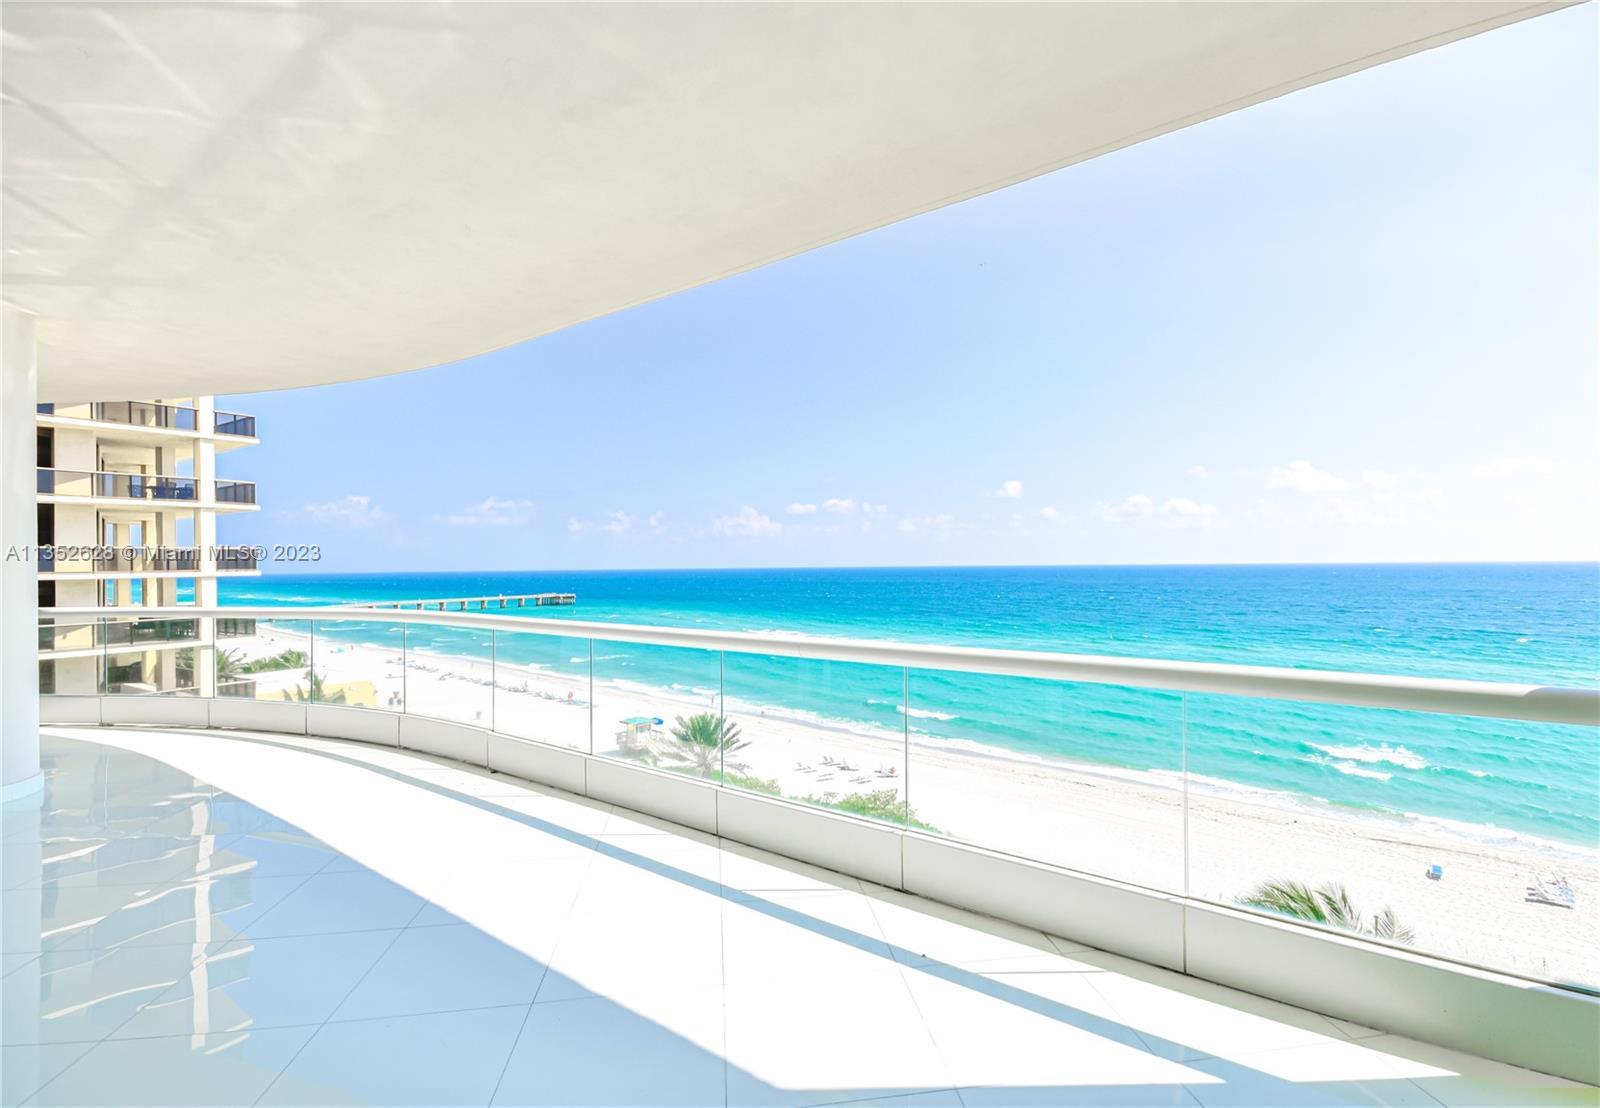 Exquisite 4-bedroom, 6.5-bath unit at Turnberry Ocean Colony, adorned by professional design. Privat